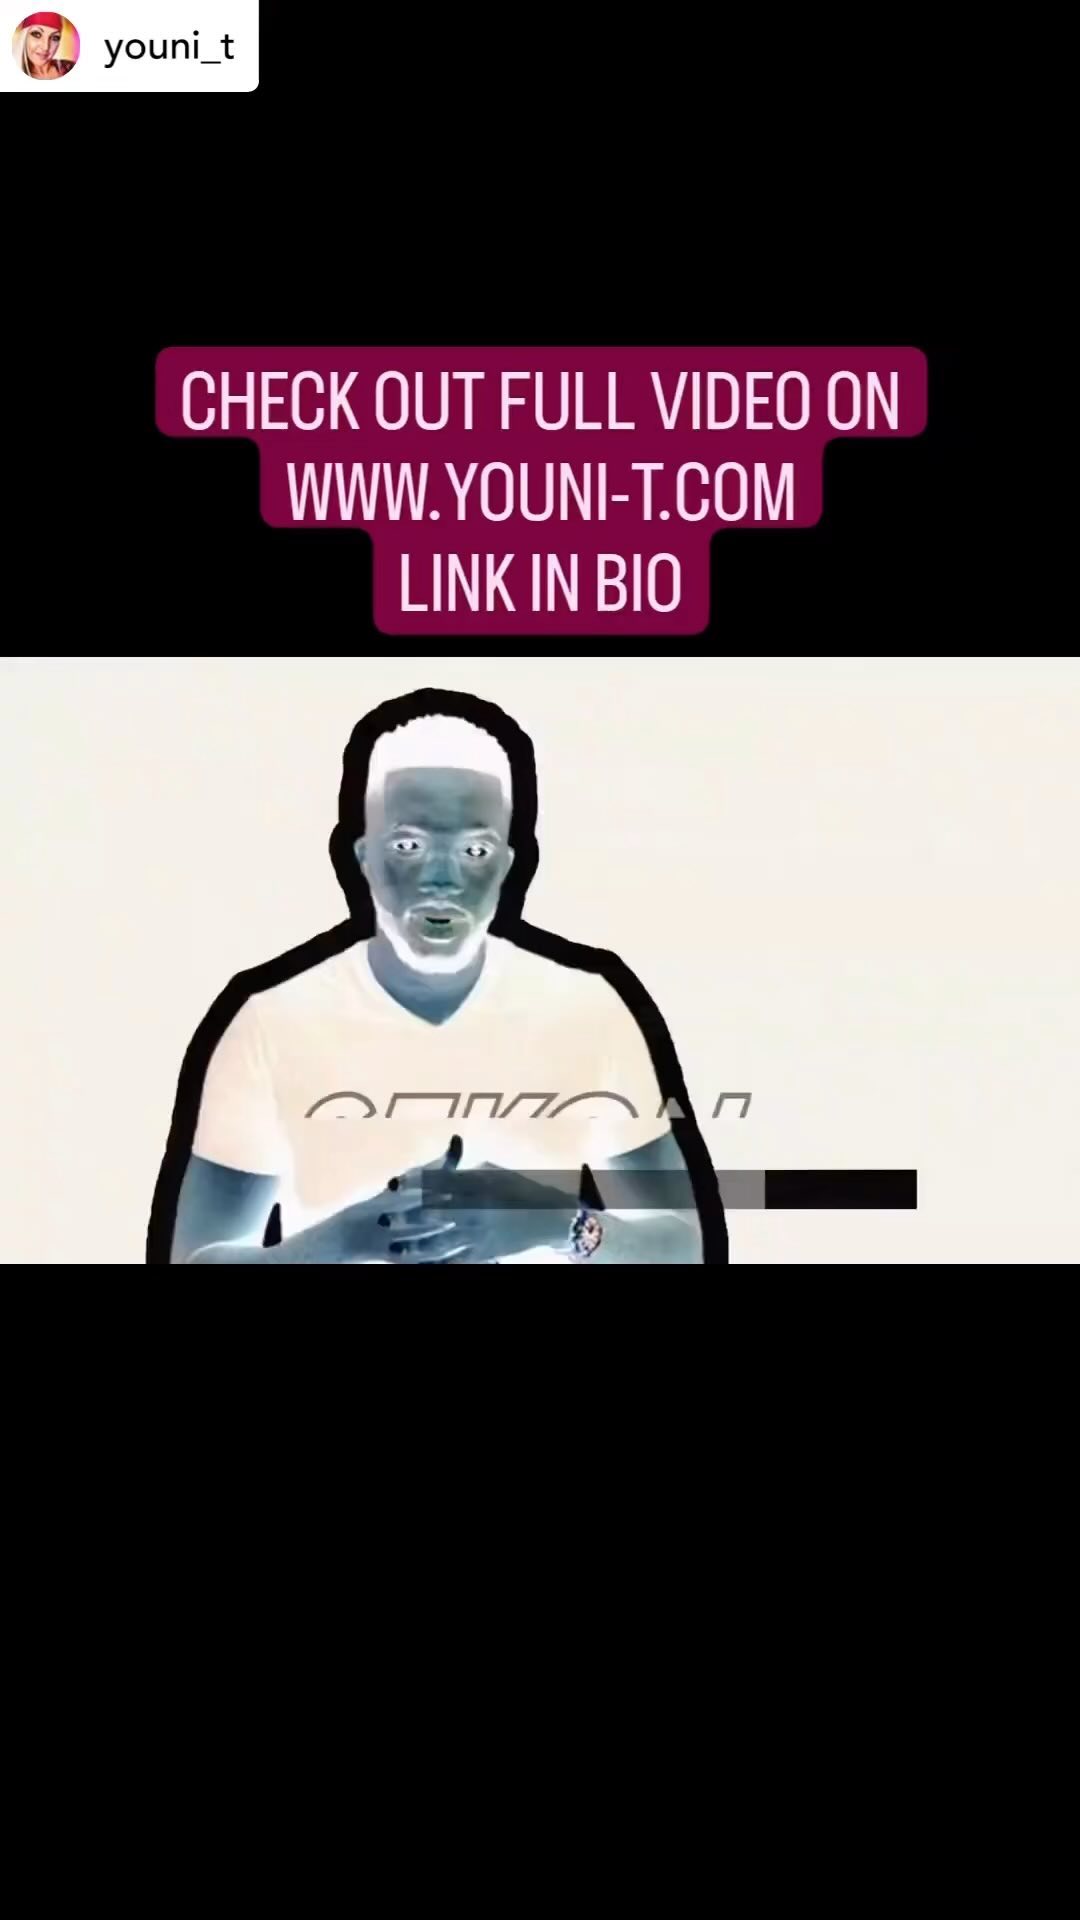 • @youni_t EPIC to @ezel_961 , @sekonsta , @mixmastergio of @961wefm “KING OJO” 🇹🇹 for a GAME CHANGING interview! ️🩶🖤 :

Link to FULL VIDEO  https://youtu.be/agw6q7mll08

ALSO AVAILABLE ON MY WEBSITE :
LINK IN BIO: WWW.YOUNI-T.COM 

@spine_1 @zigboi @sucremusic_868 @5ivelinepro @raiohofficialtt @biggz_international @palmitdawg